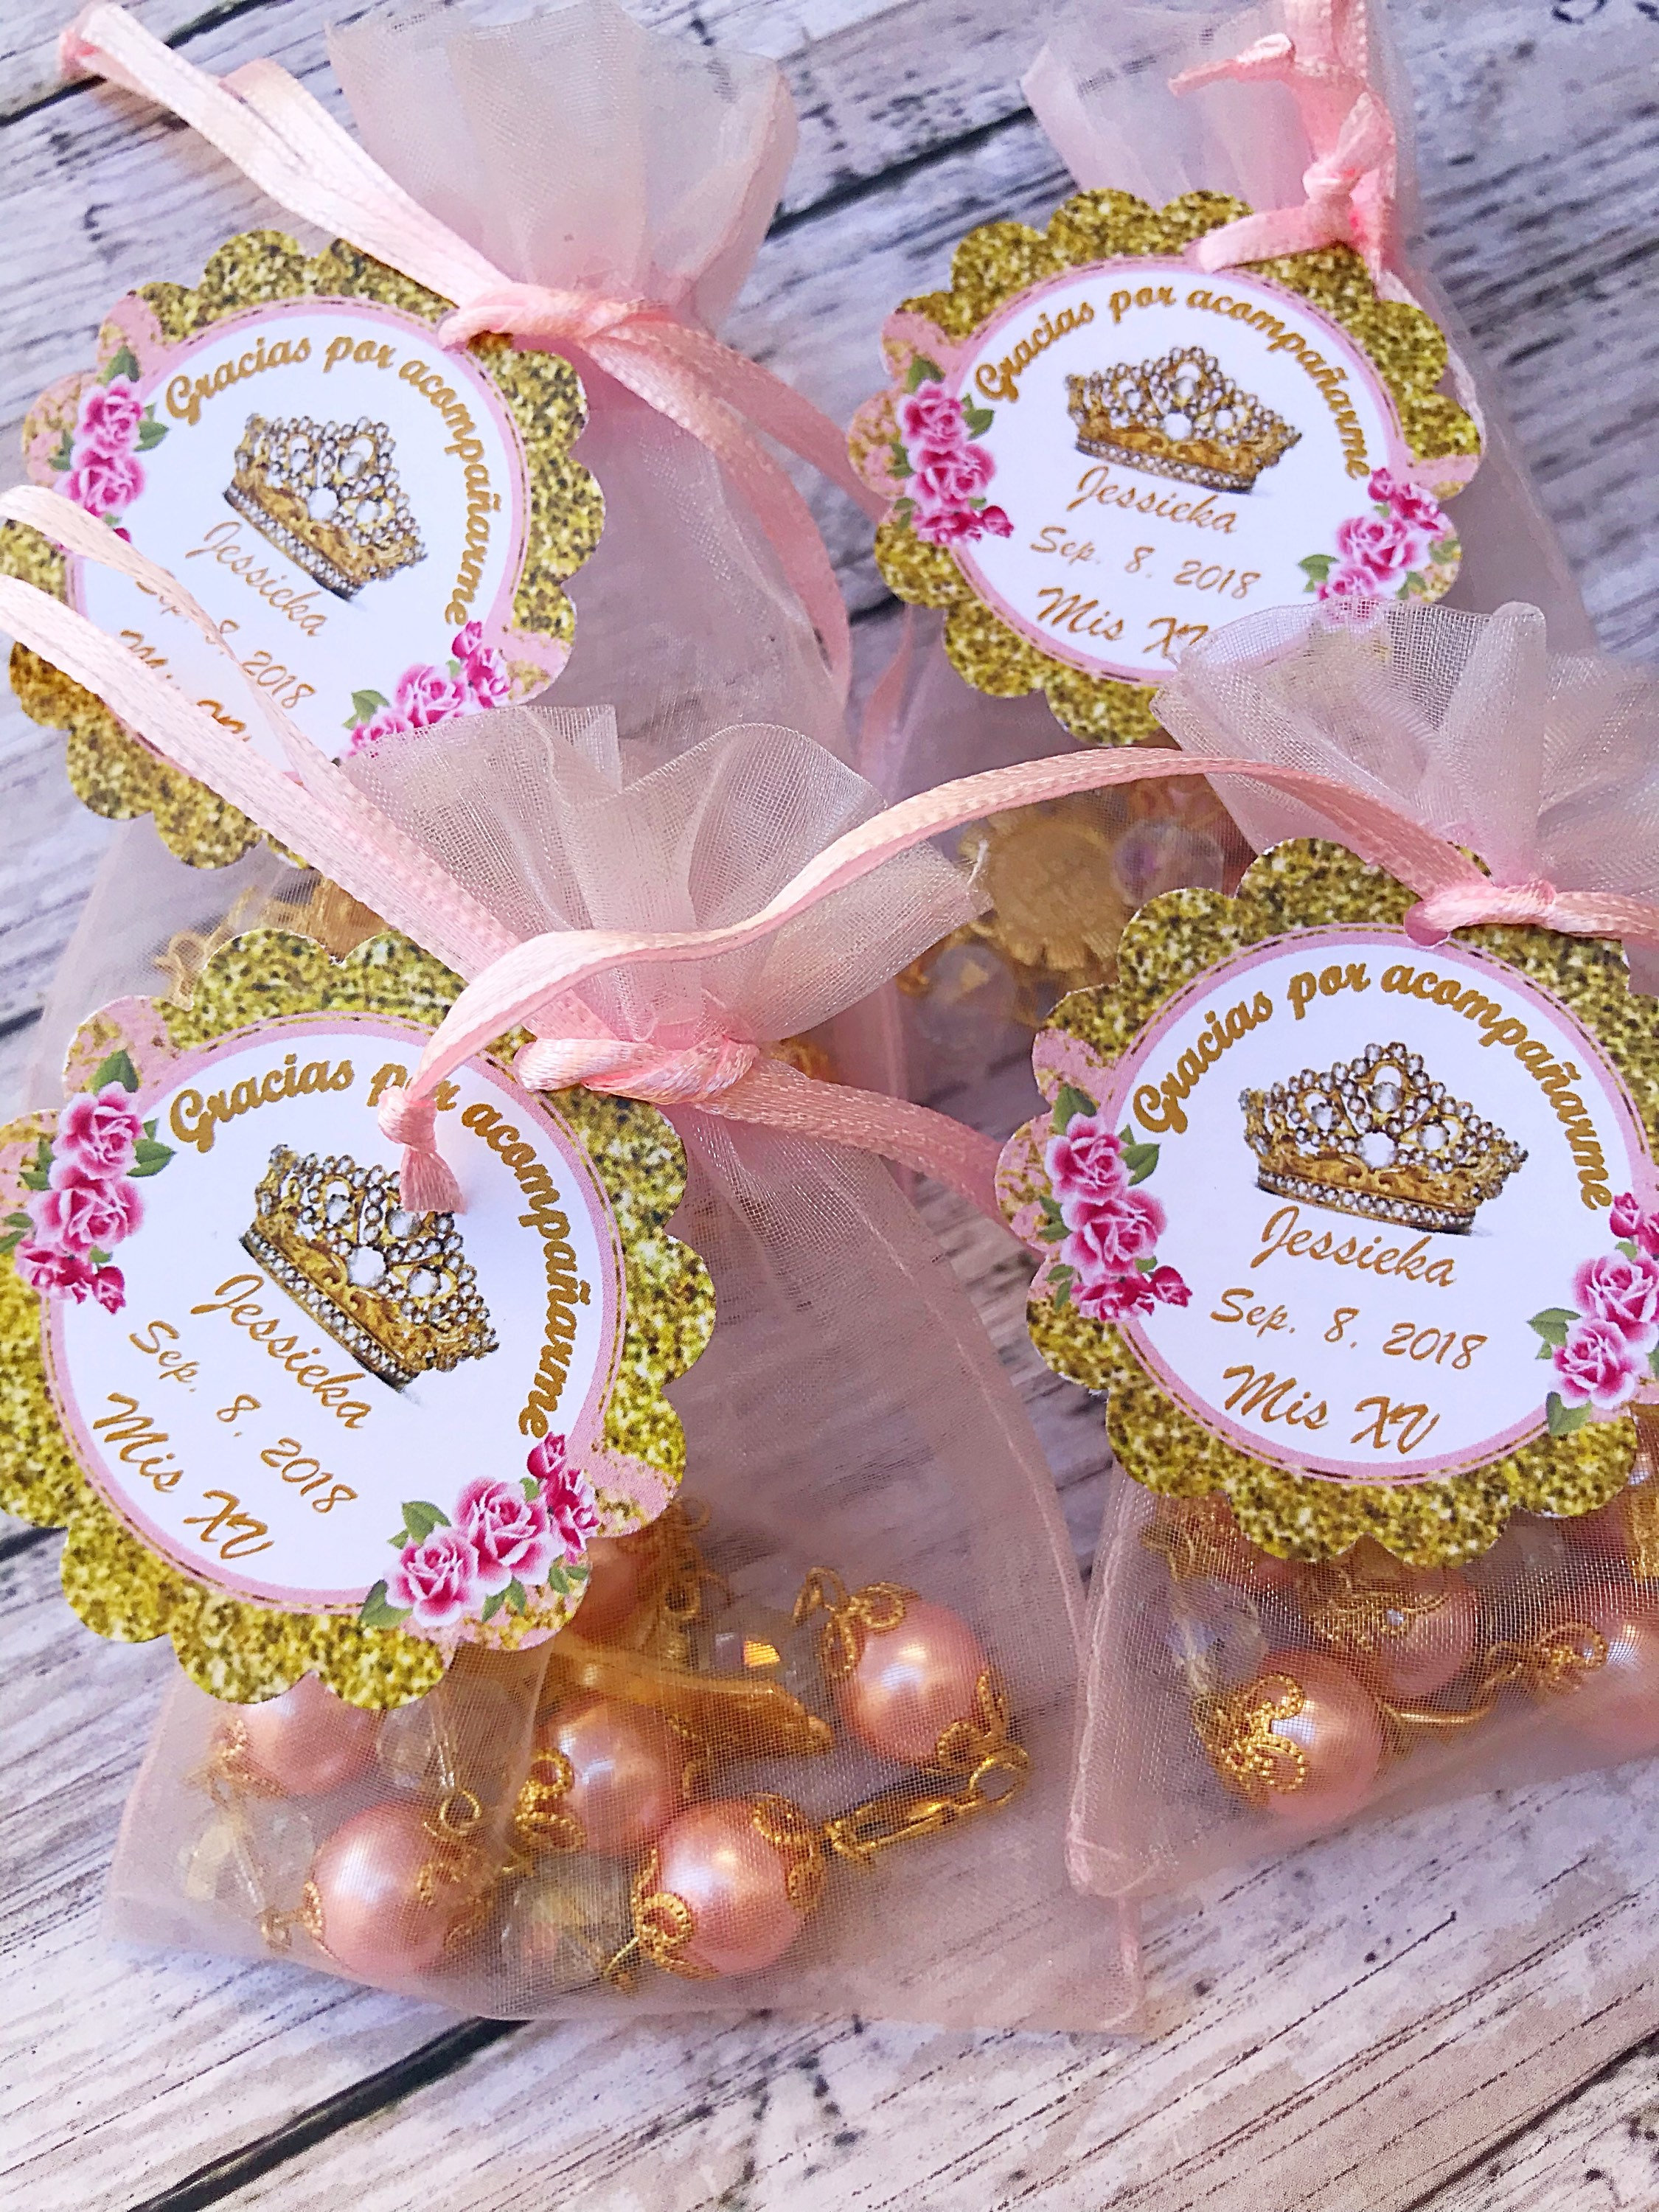 Quinceanera party favors